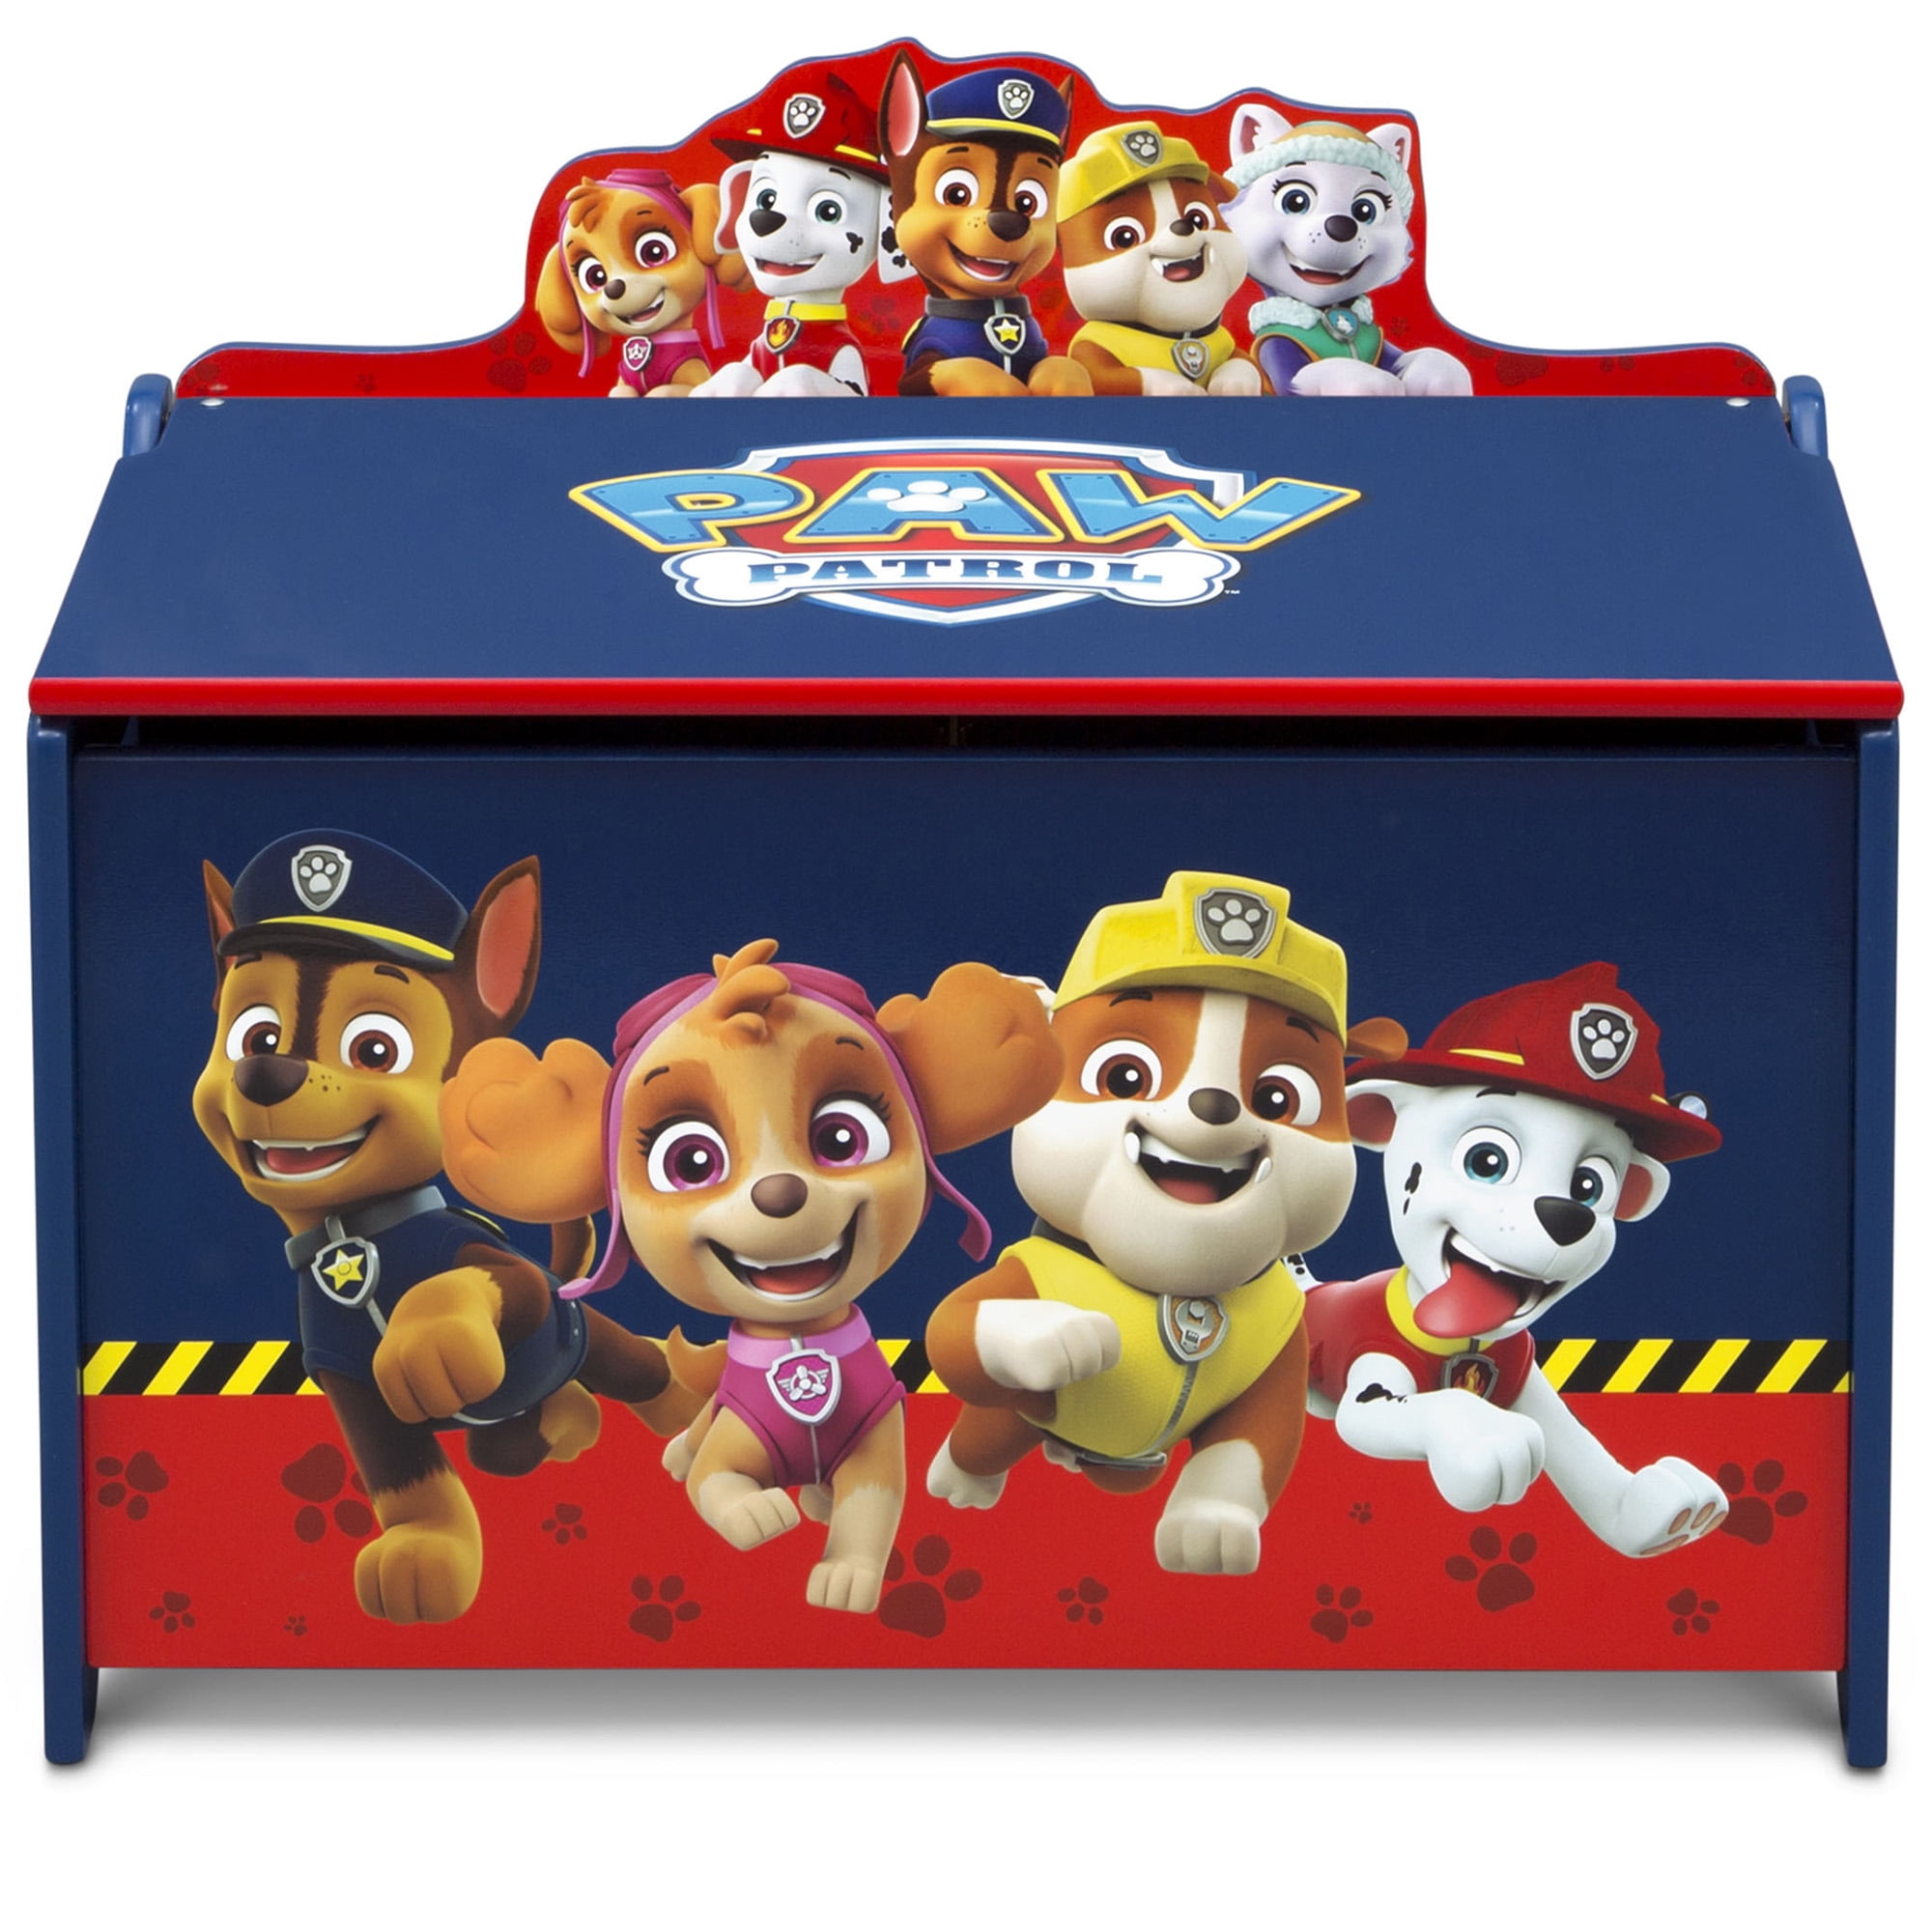 PAW Patrol Character Toy Box Nick Jr Calling all Pups Boy and Girl Kids Storage 